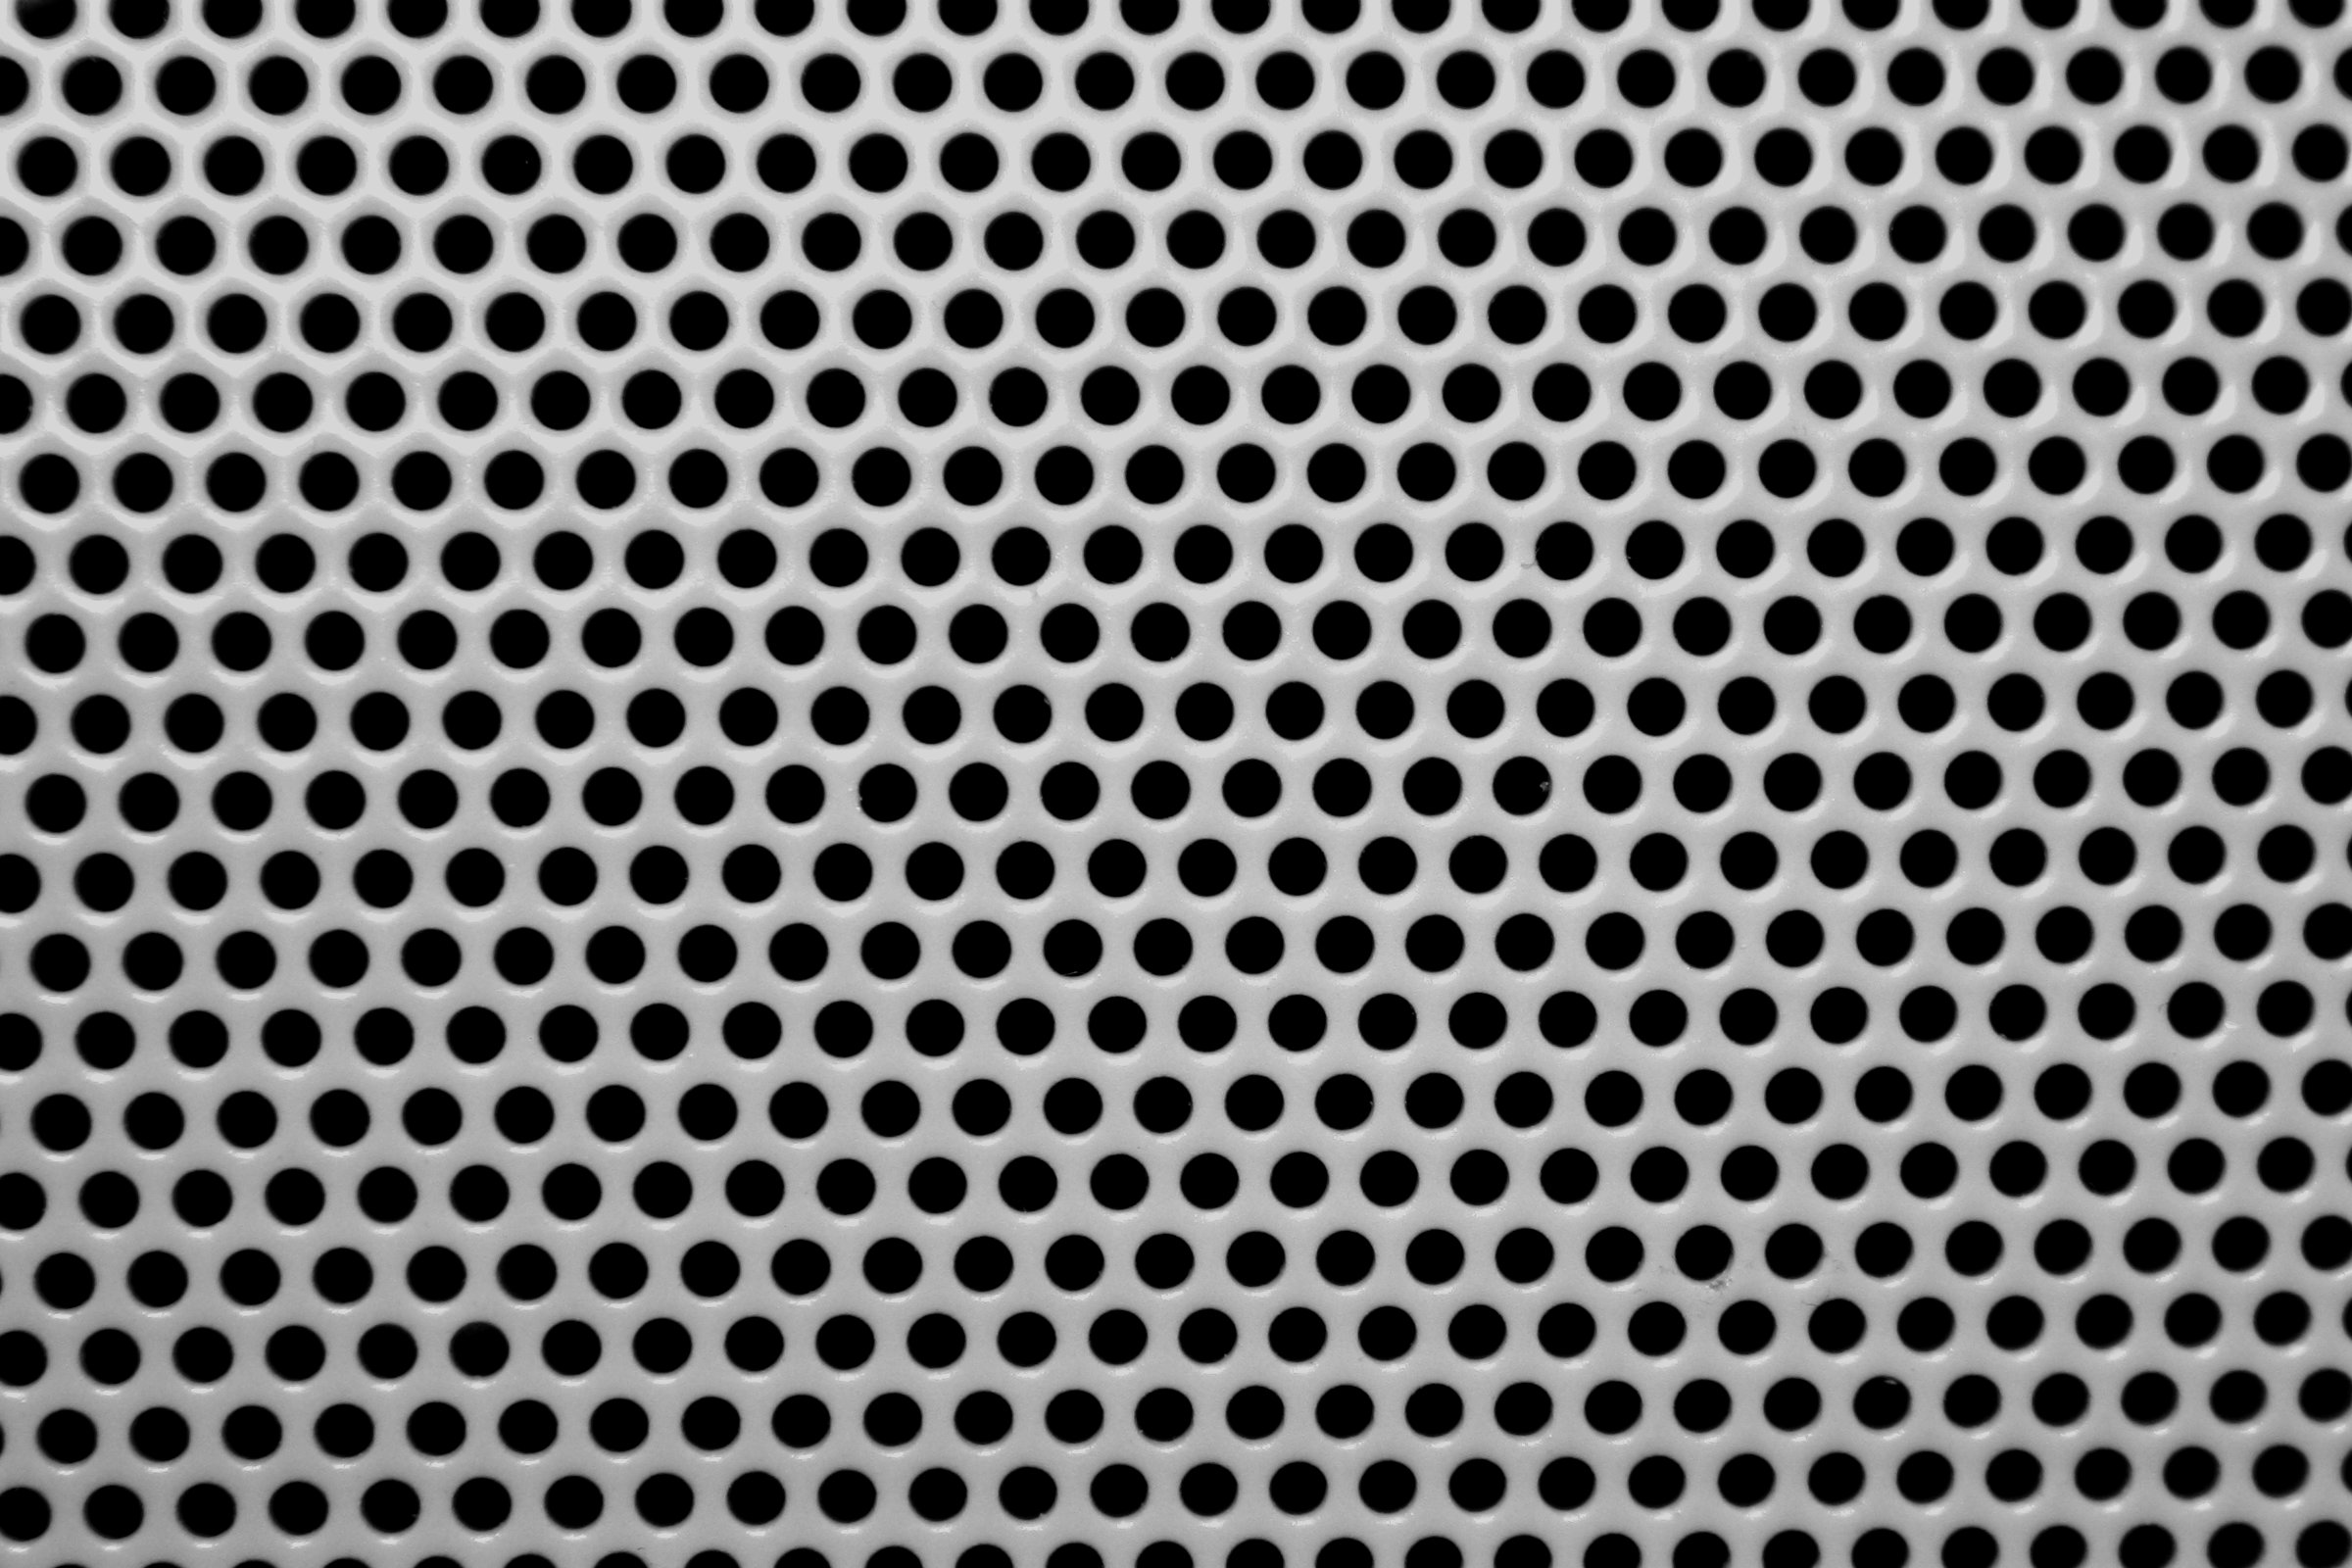 Gray Metal Mesh with Round Holes Texture Picture | Free Photograph ...